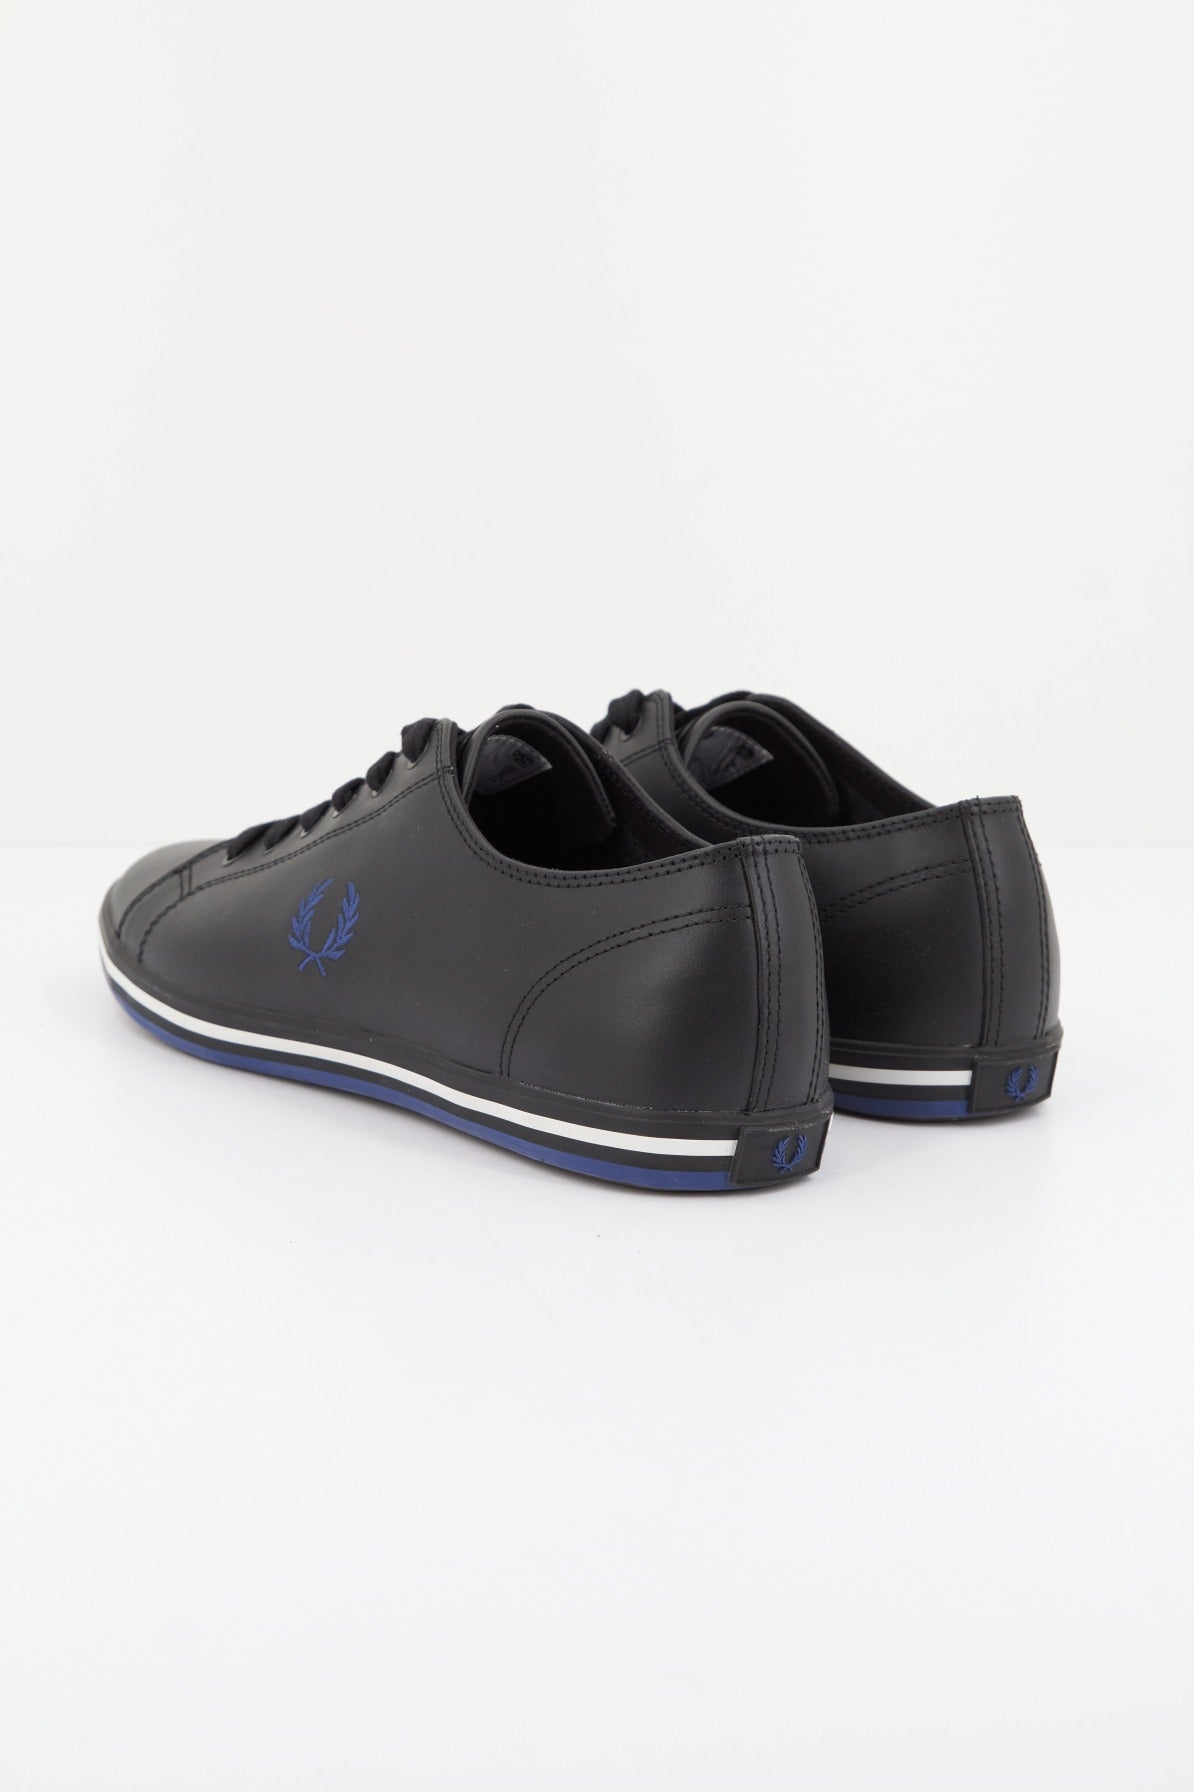 FRED PERRY KINGSTON LEATHER en color NEGRO  (3)